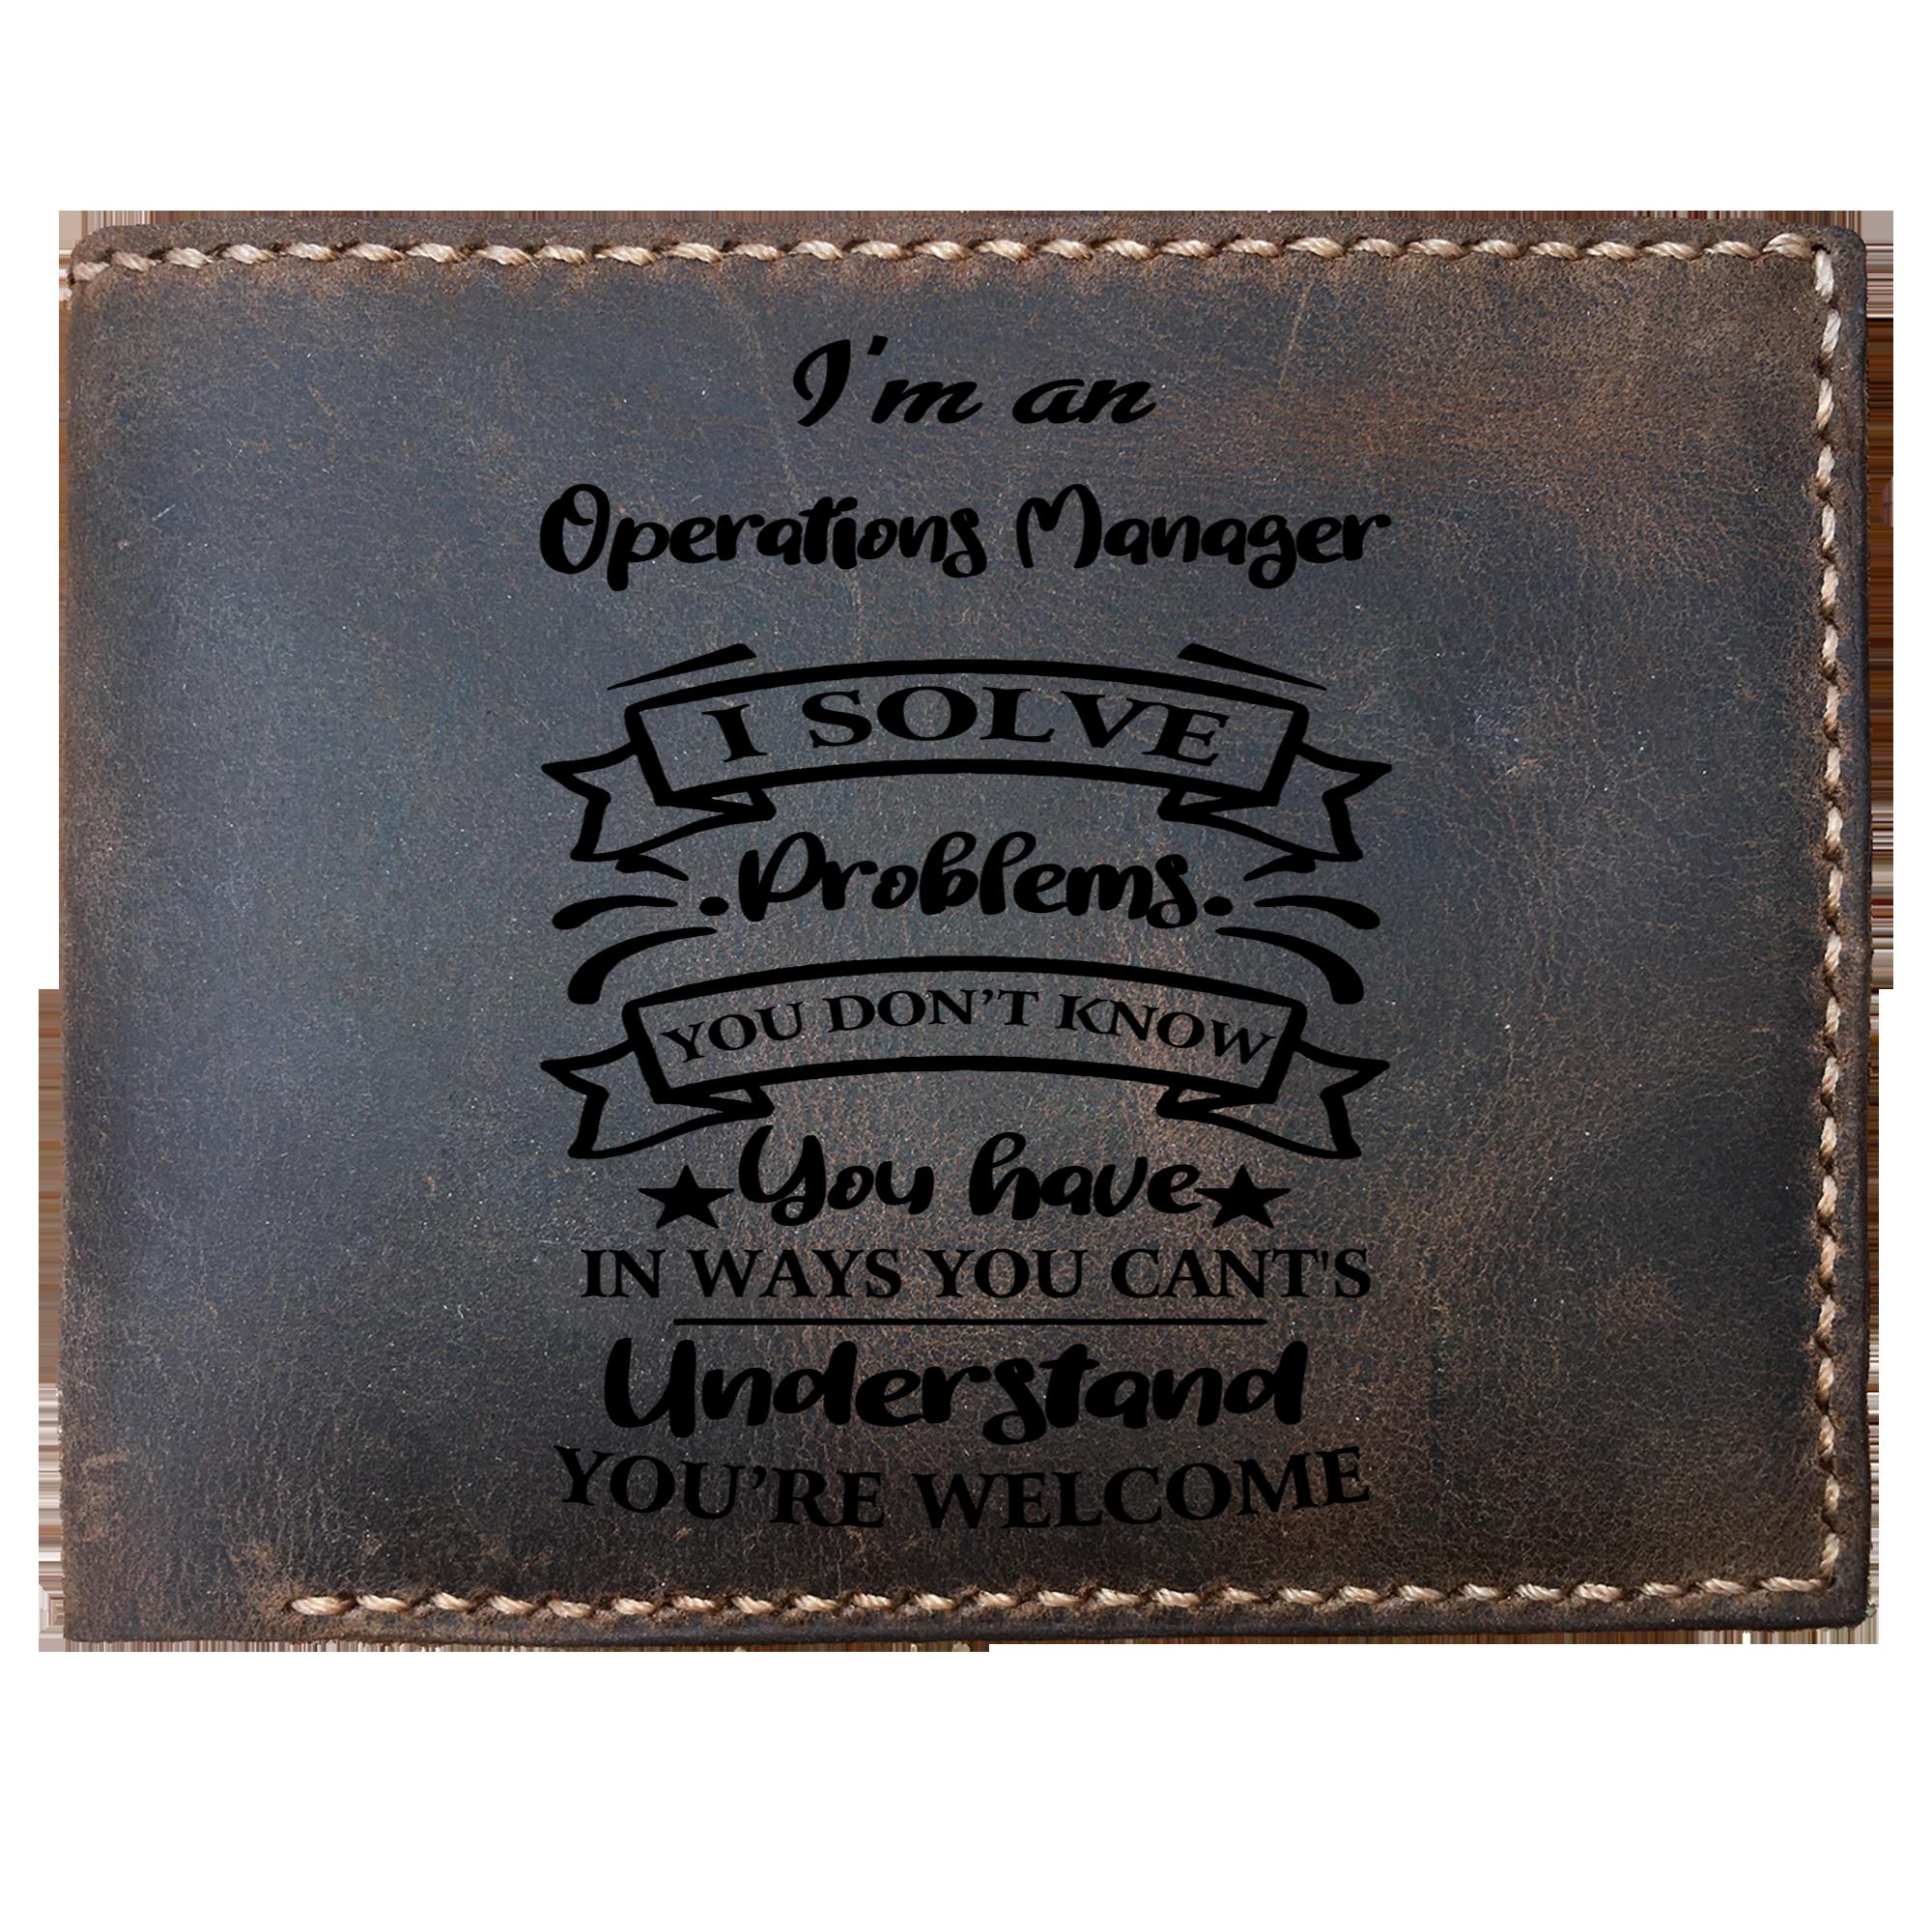 Skitongifts Funny Custom Laser Engraved Bifold Leather Wallet For Men, I'm an Operations Manager Solve Problems, Father's Day Gifts